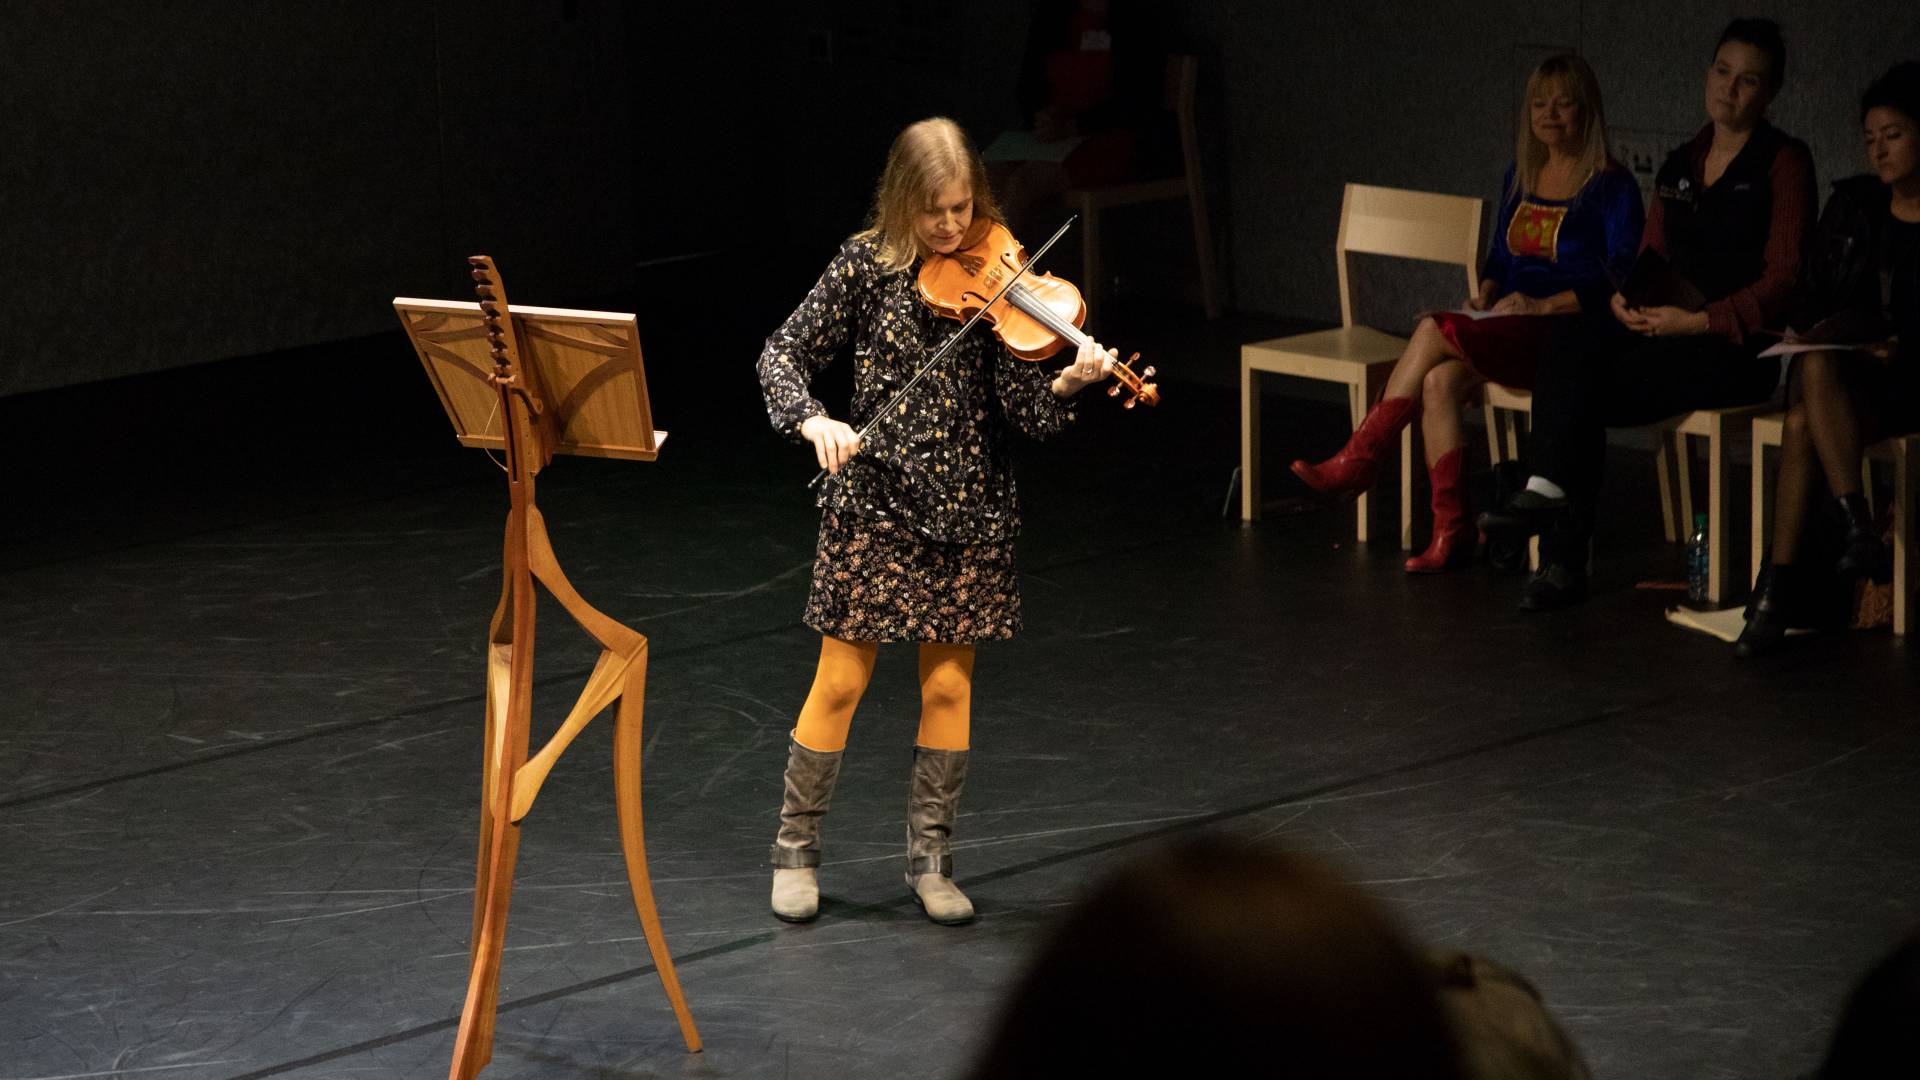 Amy Zaker playing the violin